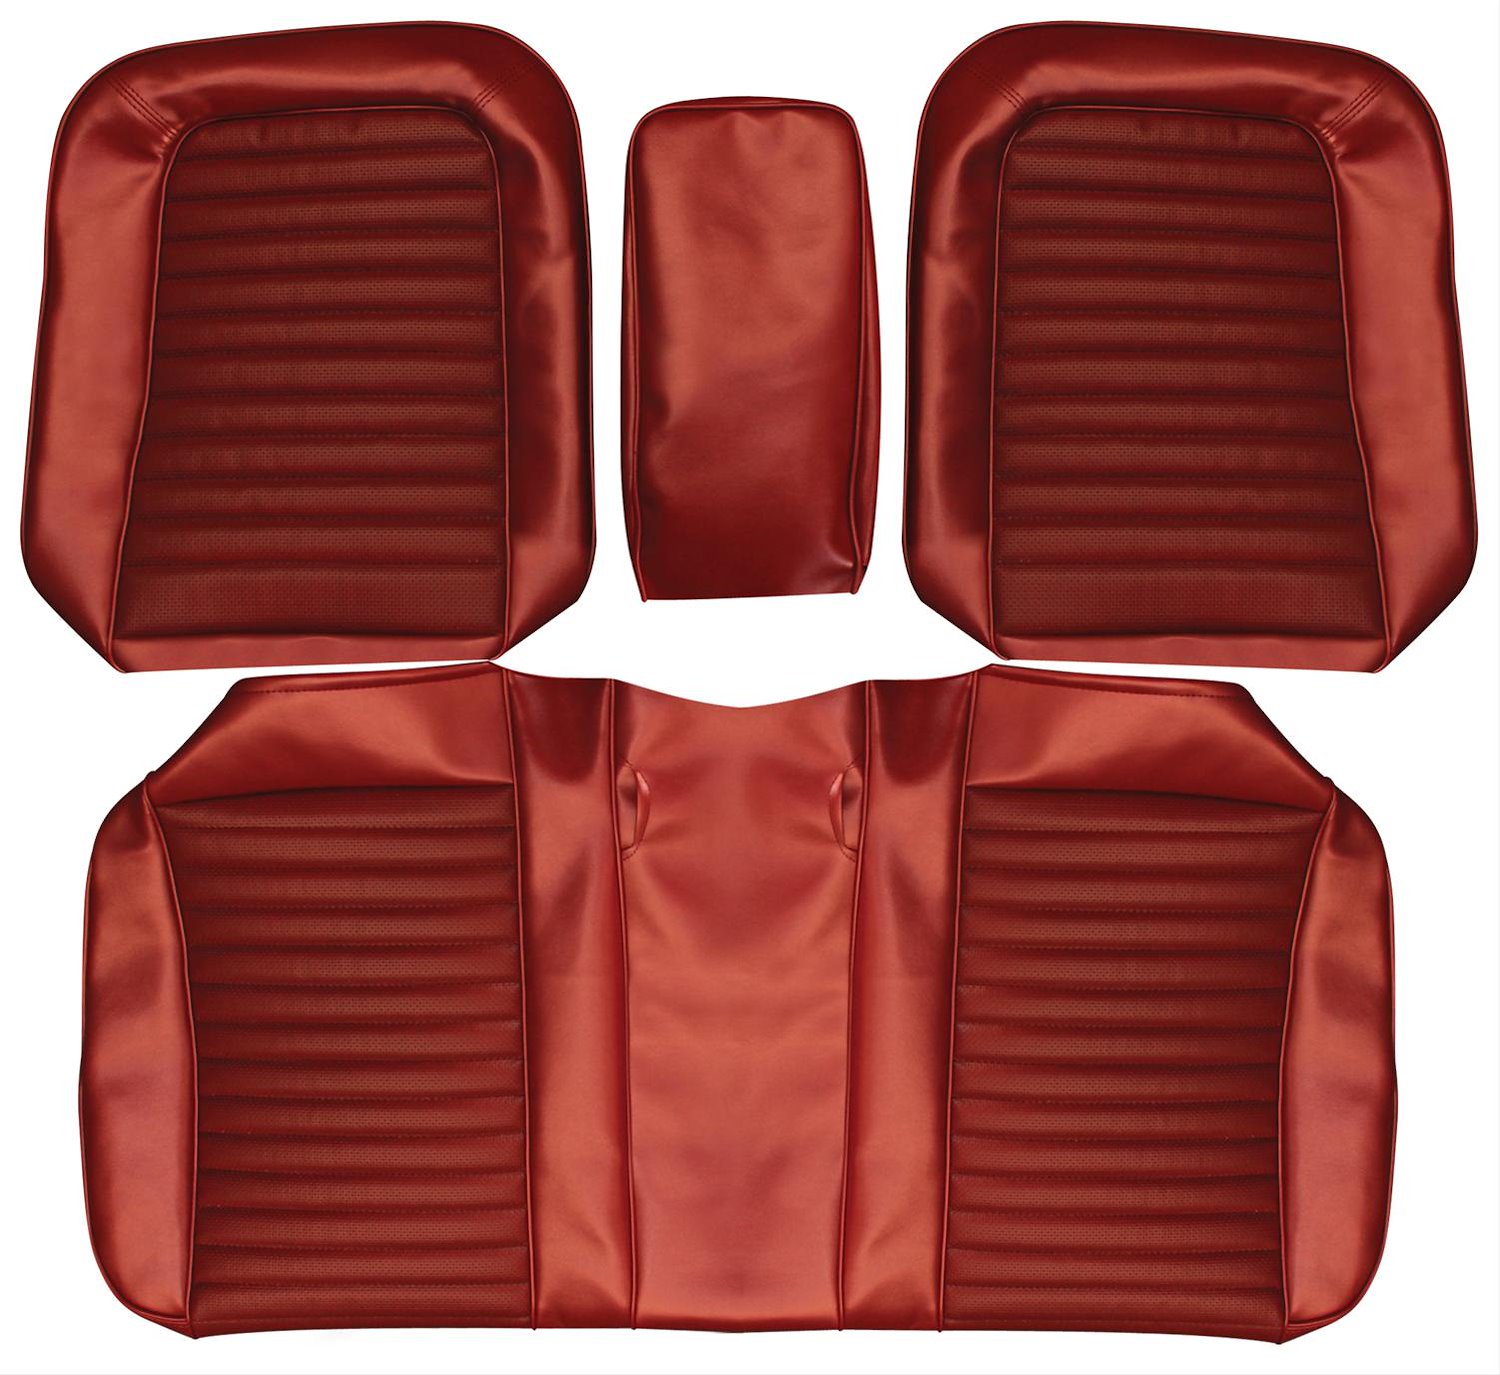 1966 Mustang Standard Front Bench Seat Cover Kit